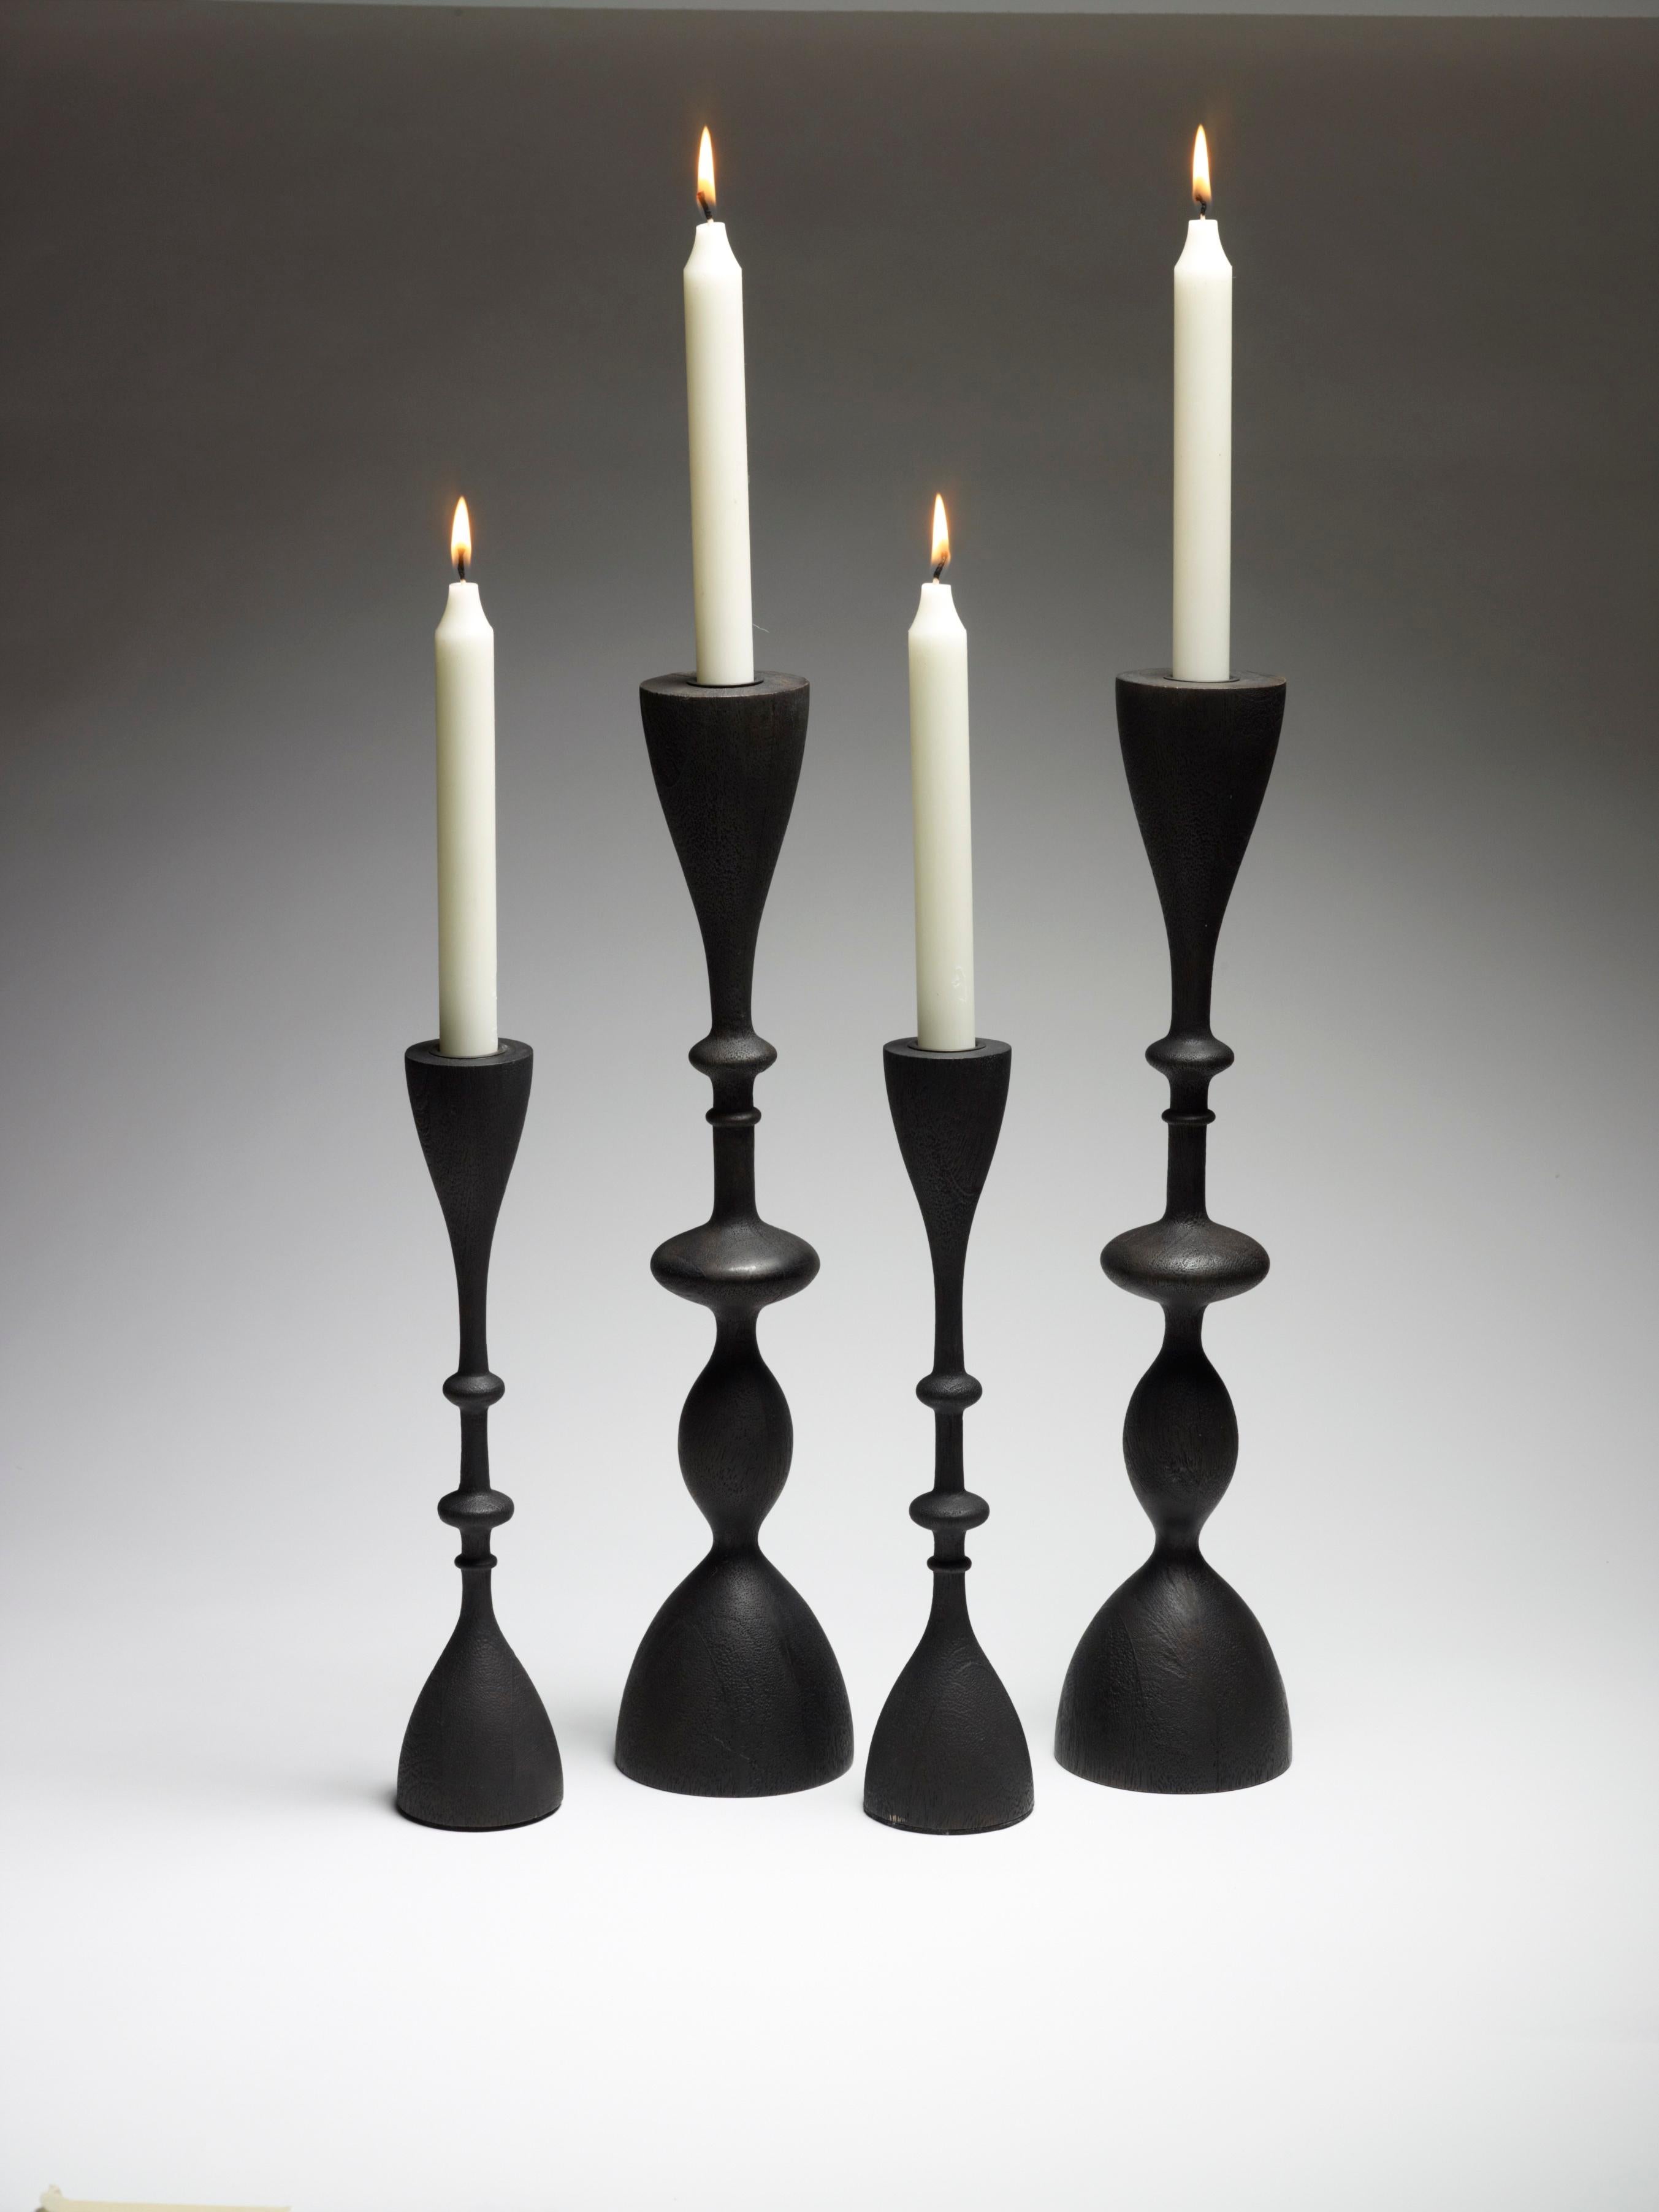 Wave Candlestick (single candlestick, large, blackened) For Sale 7